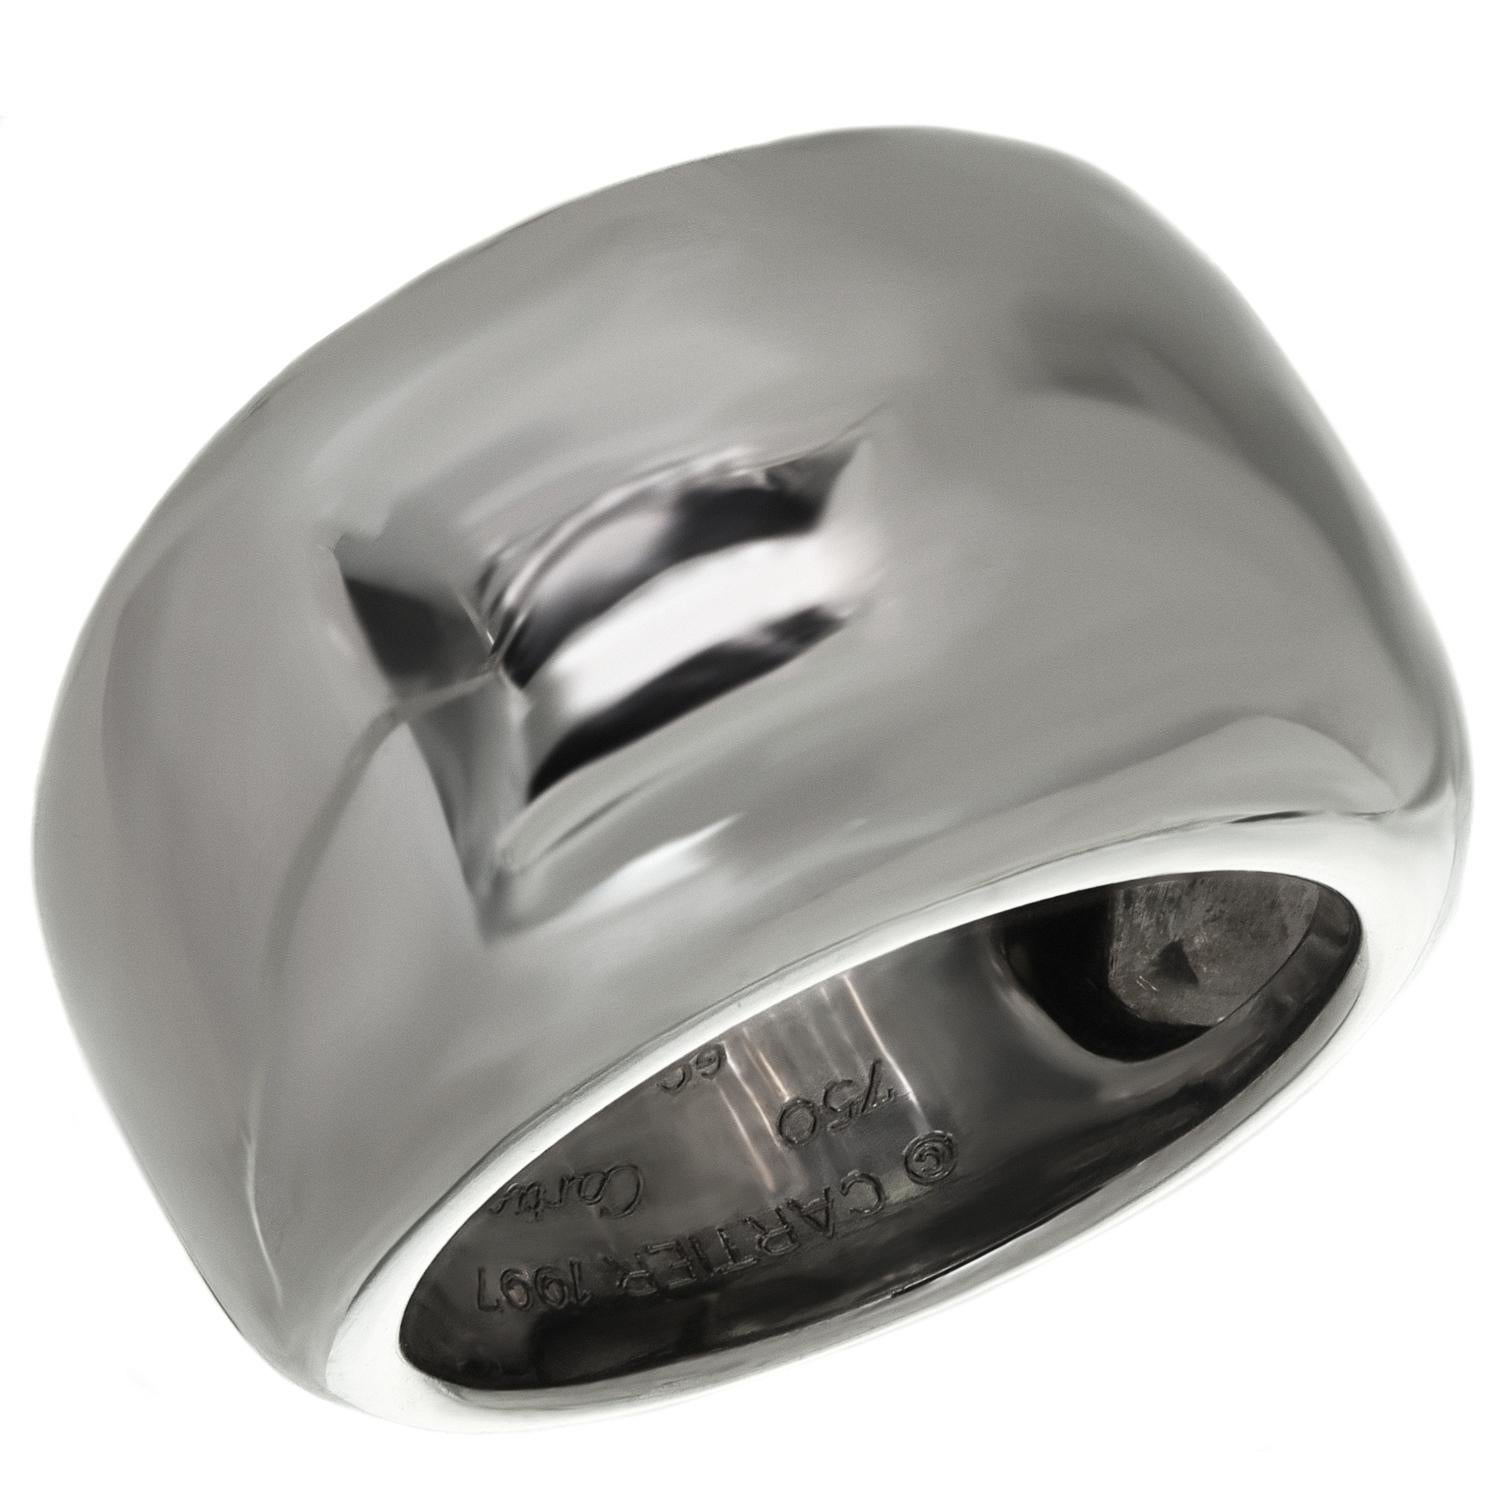 Cartier Nouvelle Vague White Gold Domed Band Ring